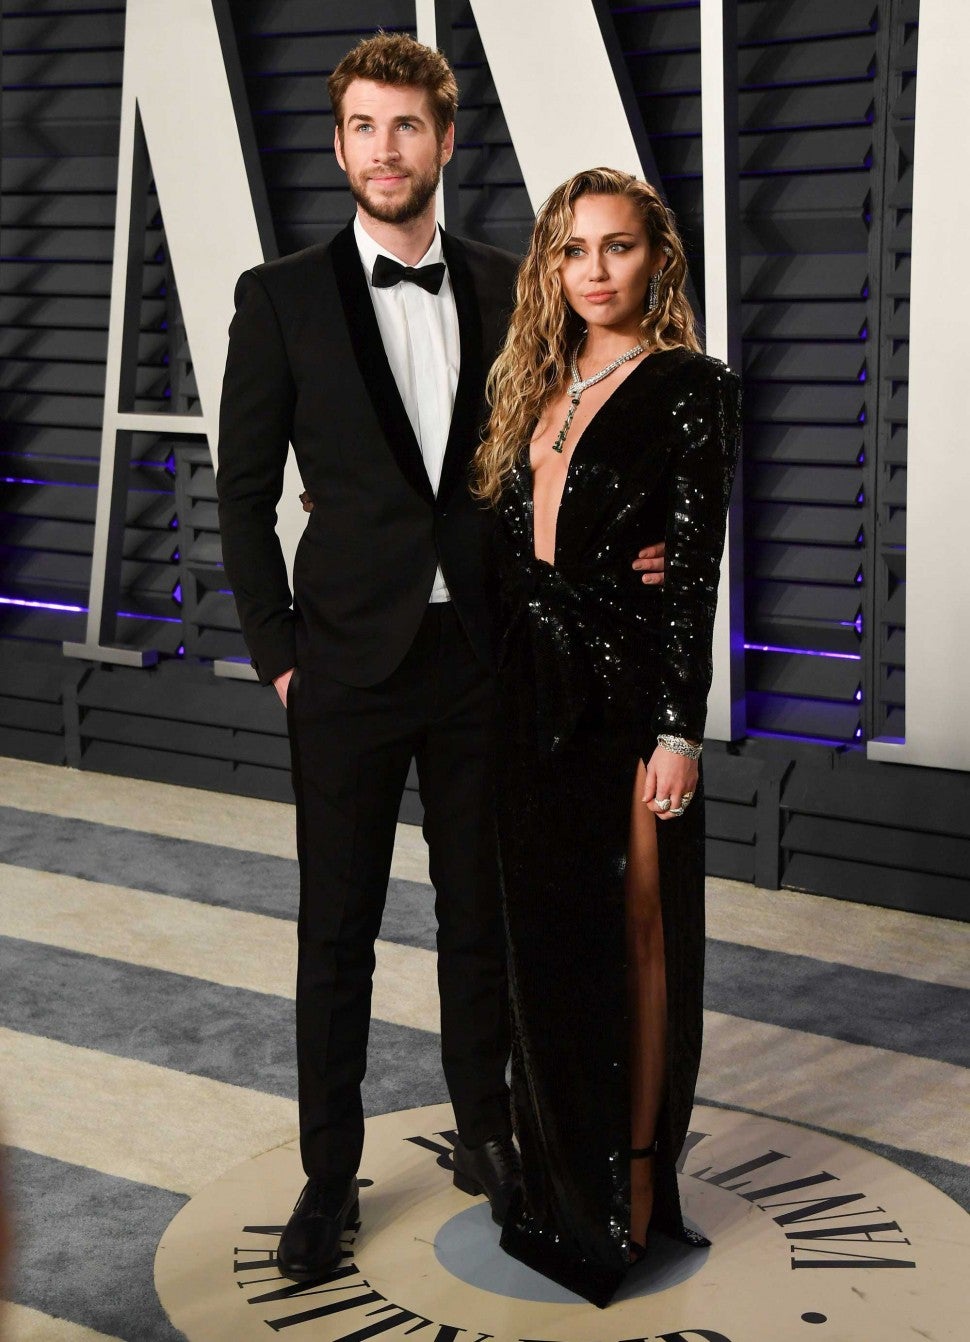 Liam Hemsworth and Miley Cyrus at the Vanity Fair Oscars Party